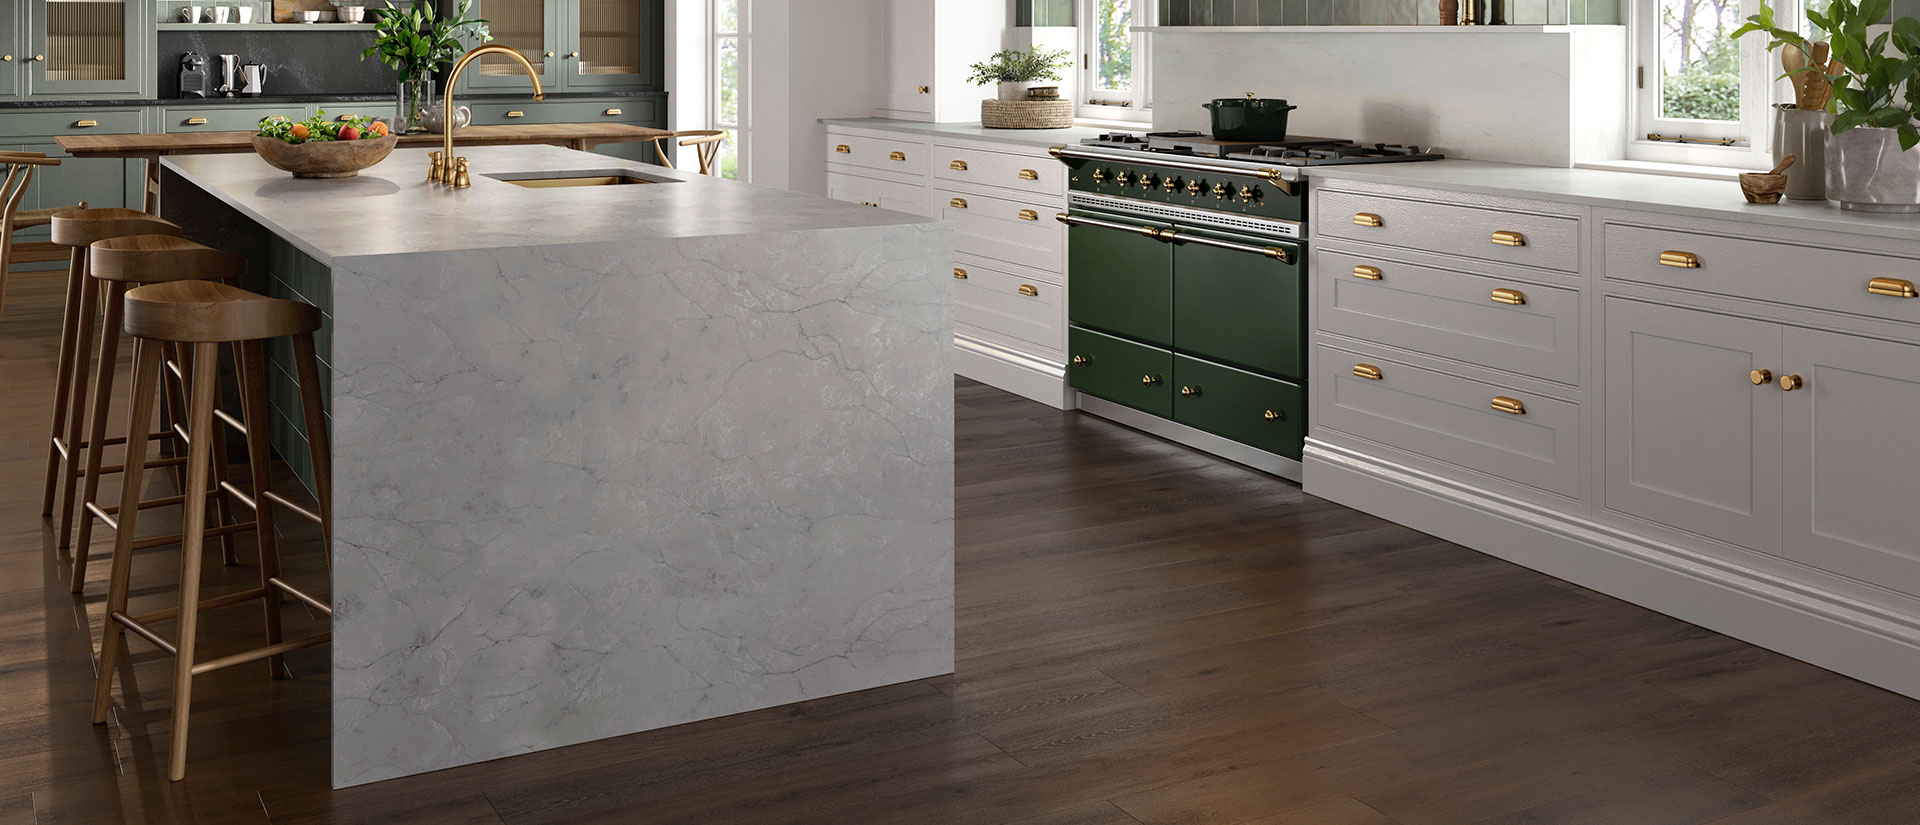 Calacatta Versailles quartz countertop in a contemporary kitchen with wooden cabinets